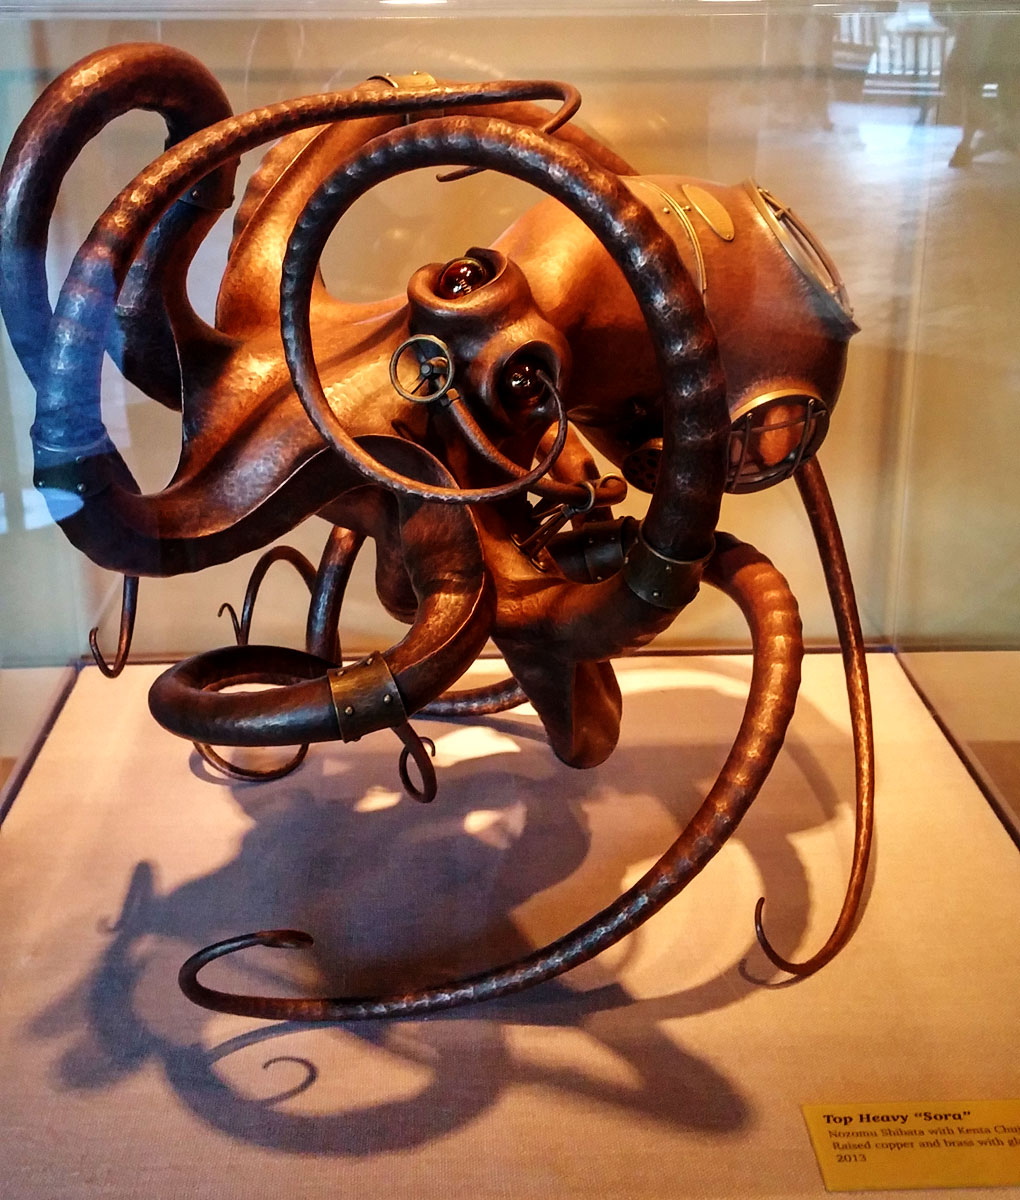 The entry to the "Tentacles" exhibit featured a cool steampunk-esque octopus.